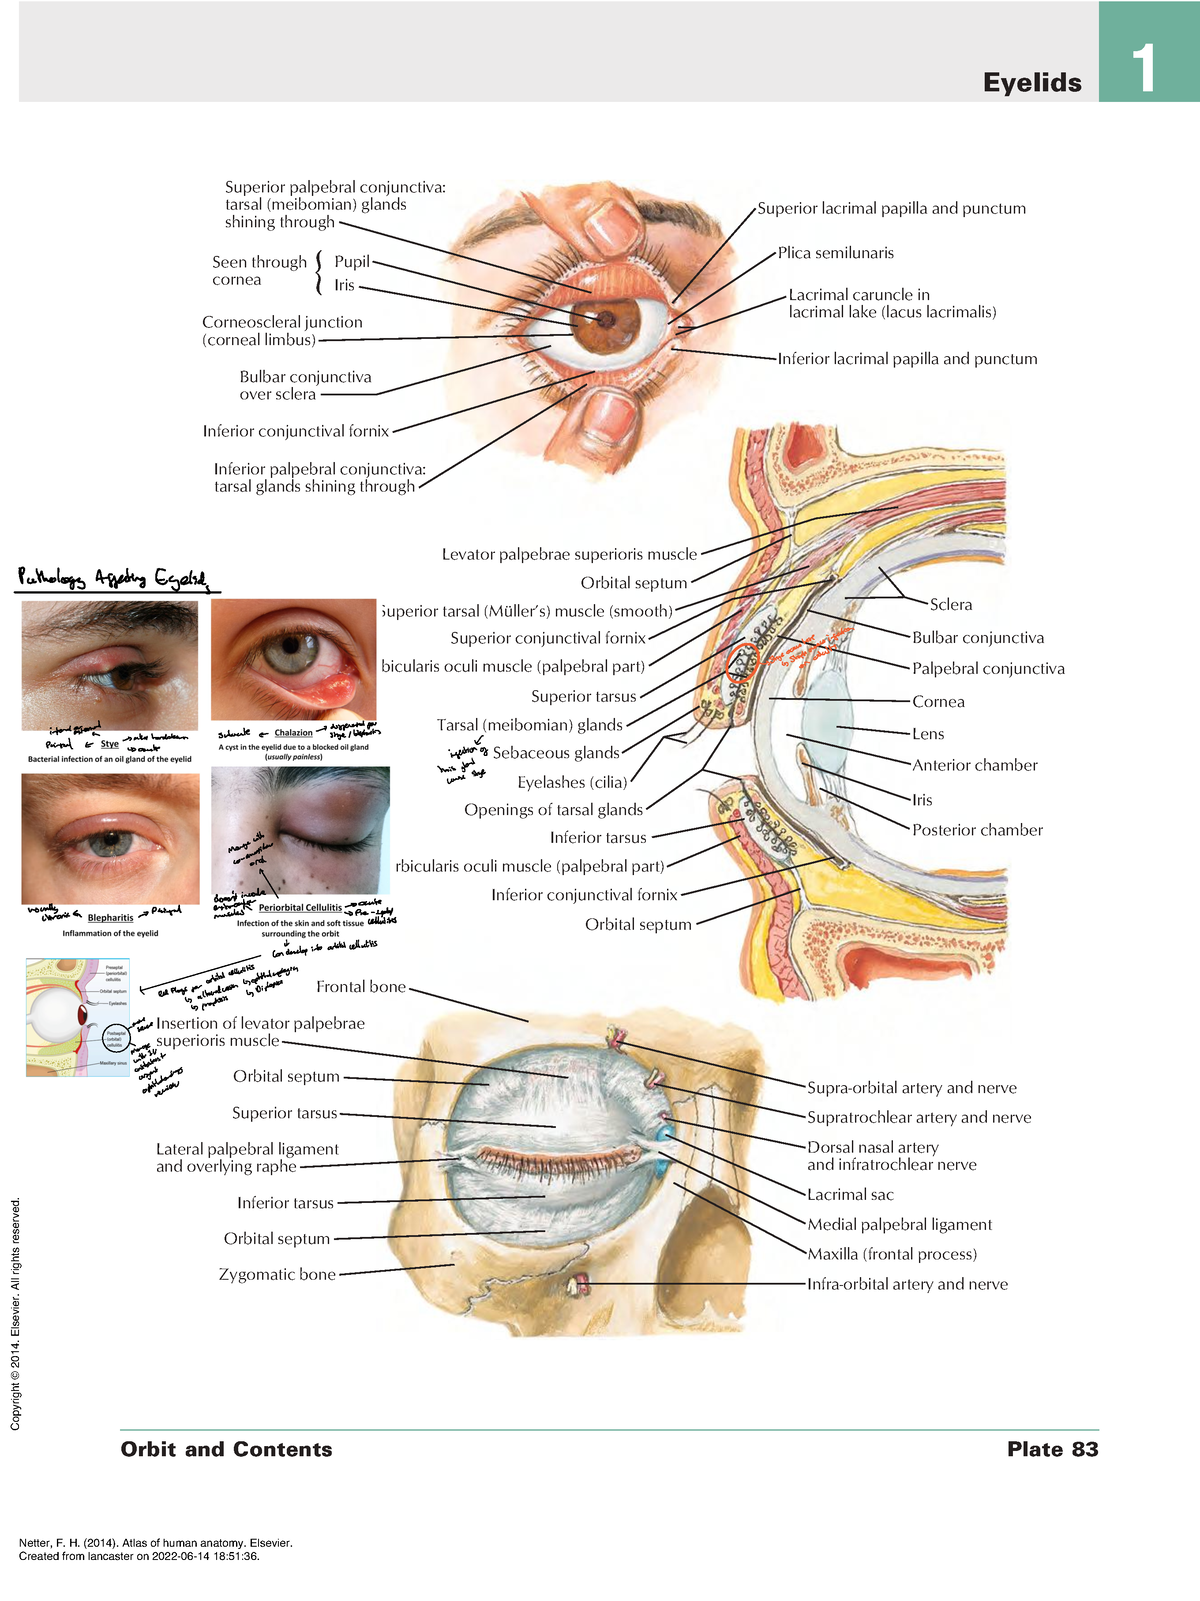 Anatomy and Physiology of The Eye - ppt video online download